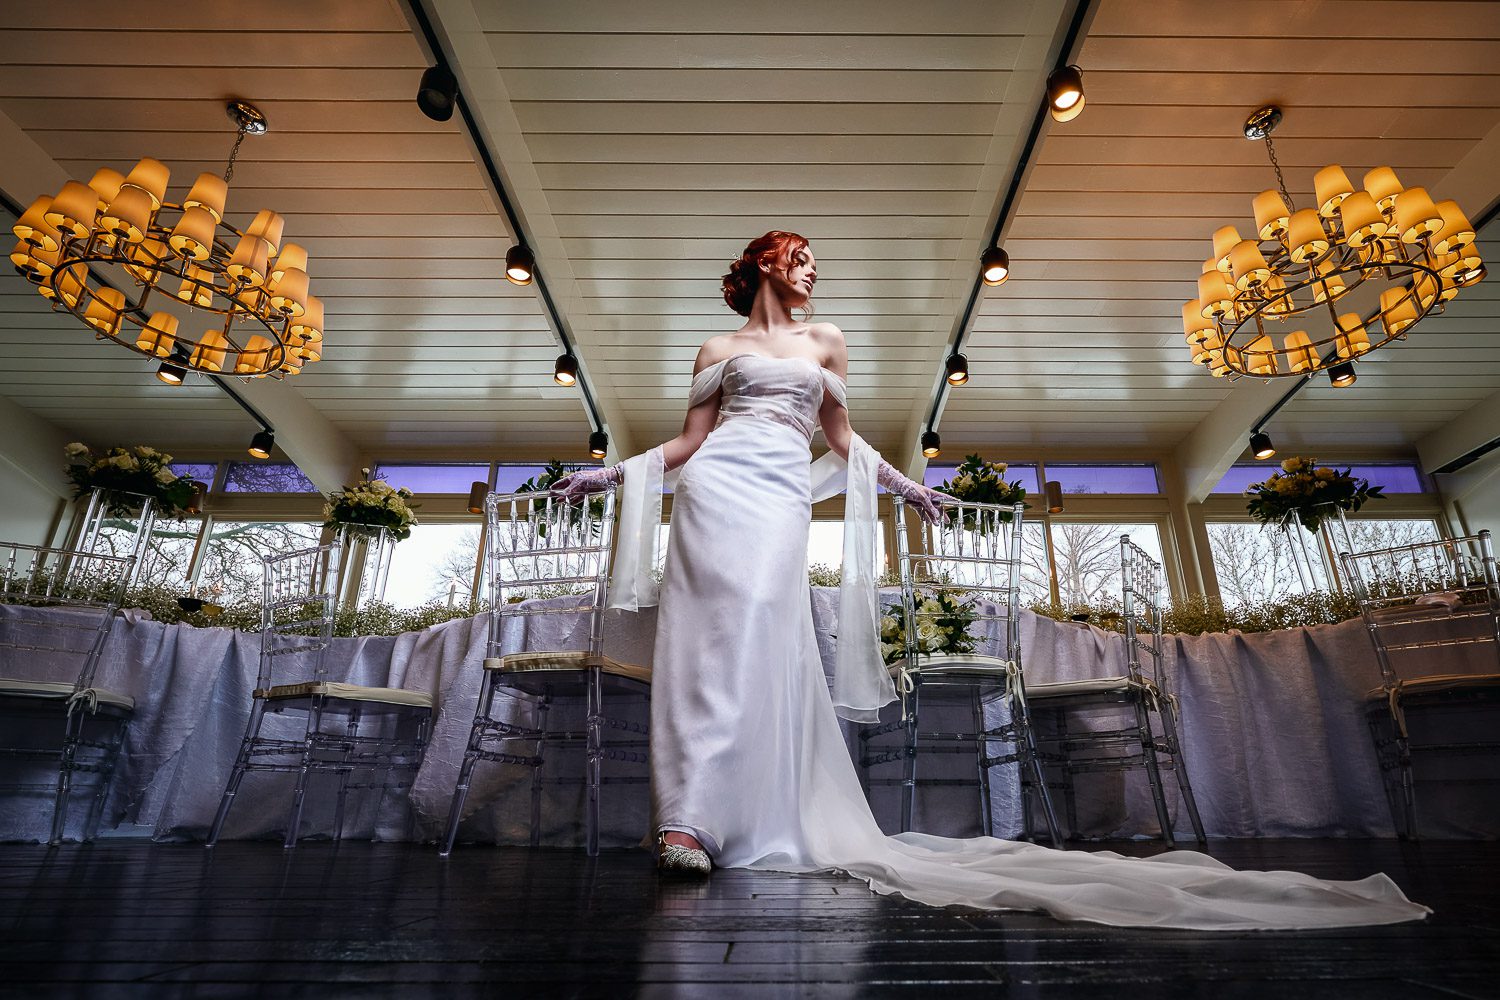 Bride stands in Chatol Ballroom with yellow chandeliers and acrylic chairs in Centralia Missouri.